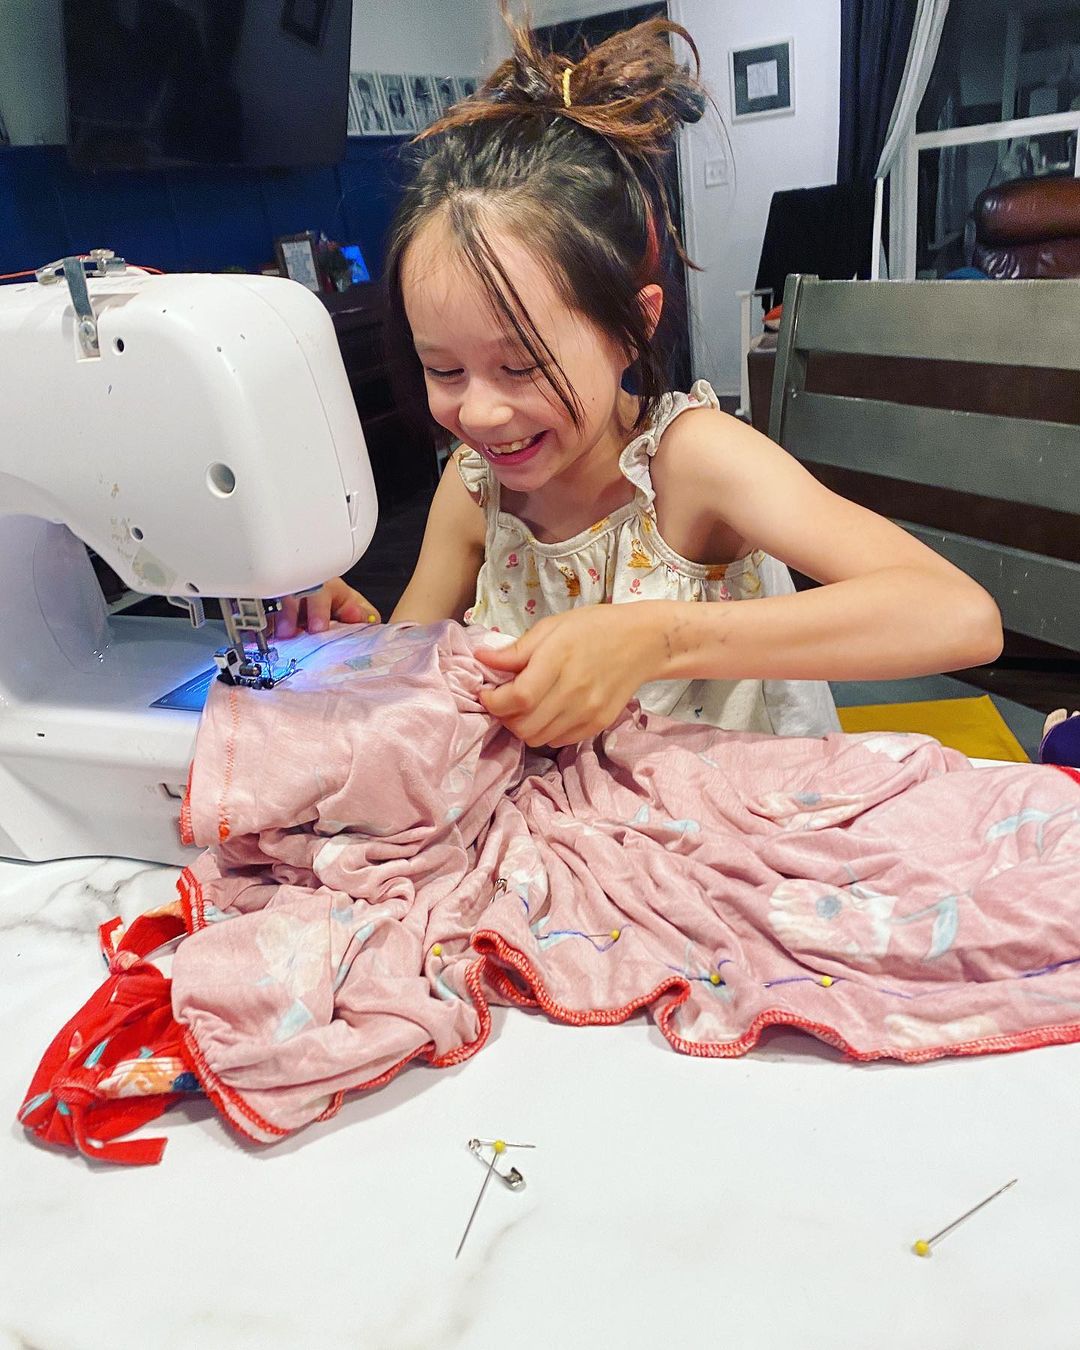 kaia aragon smiling as she uses a sewing machine.